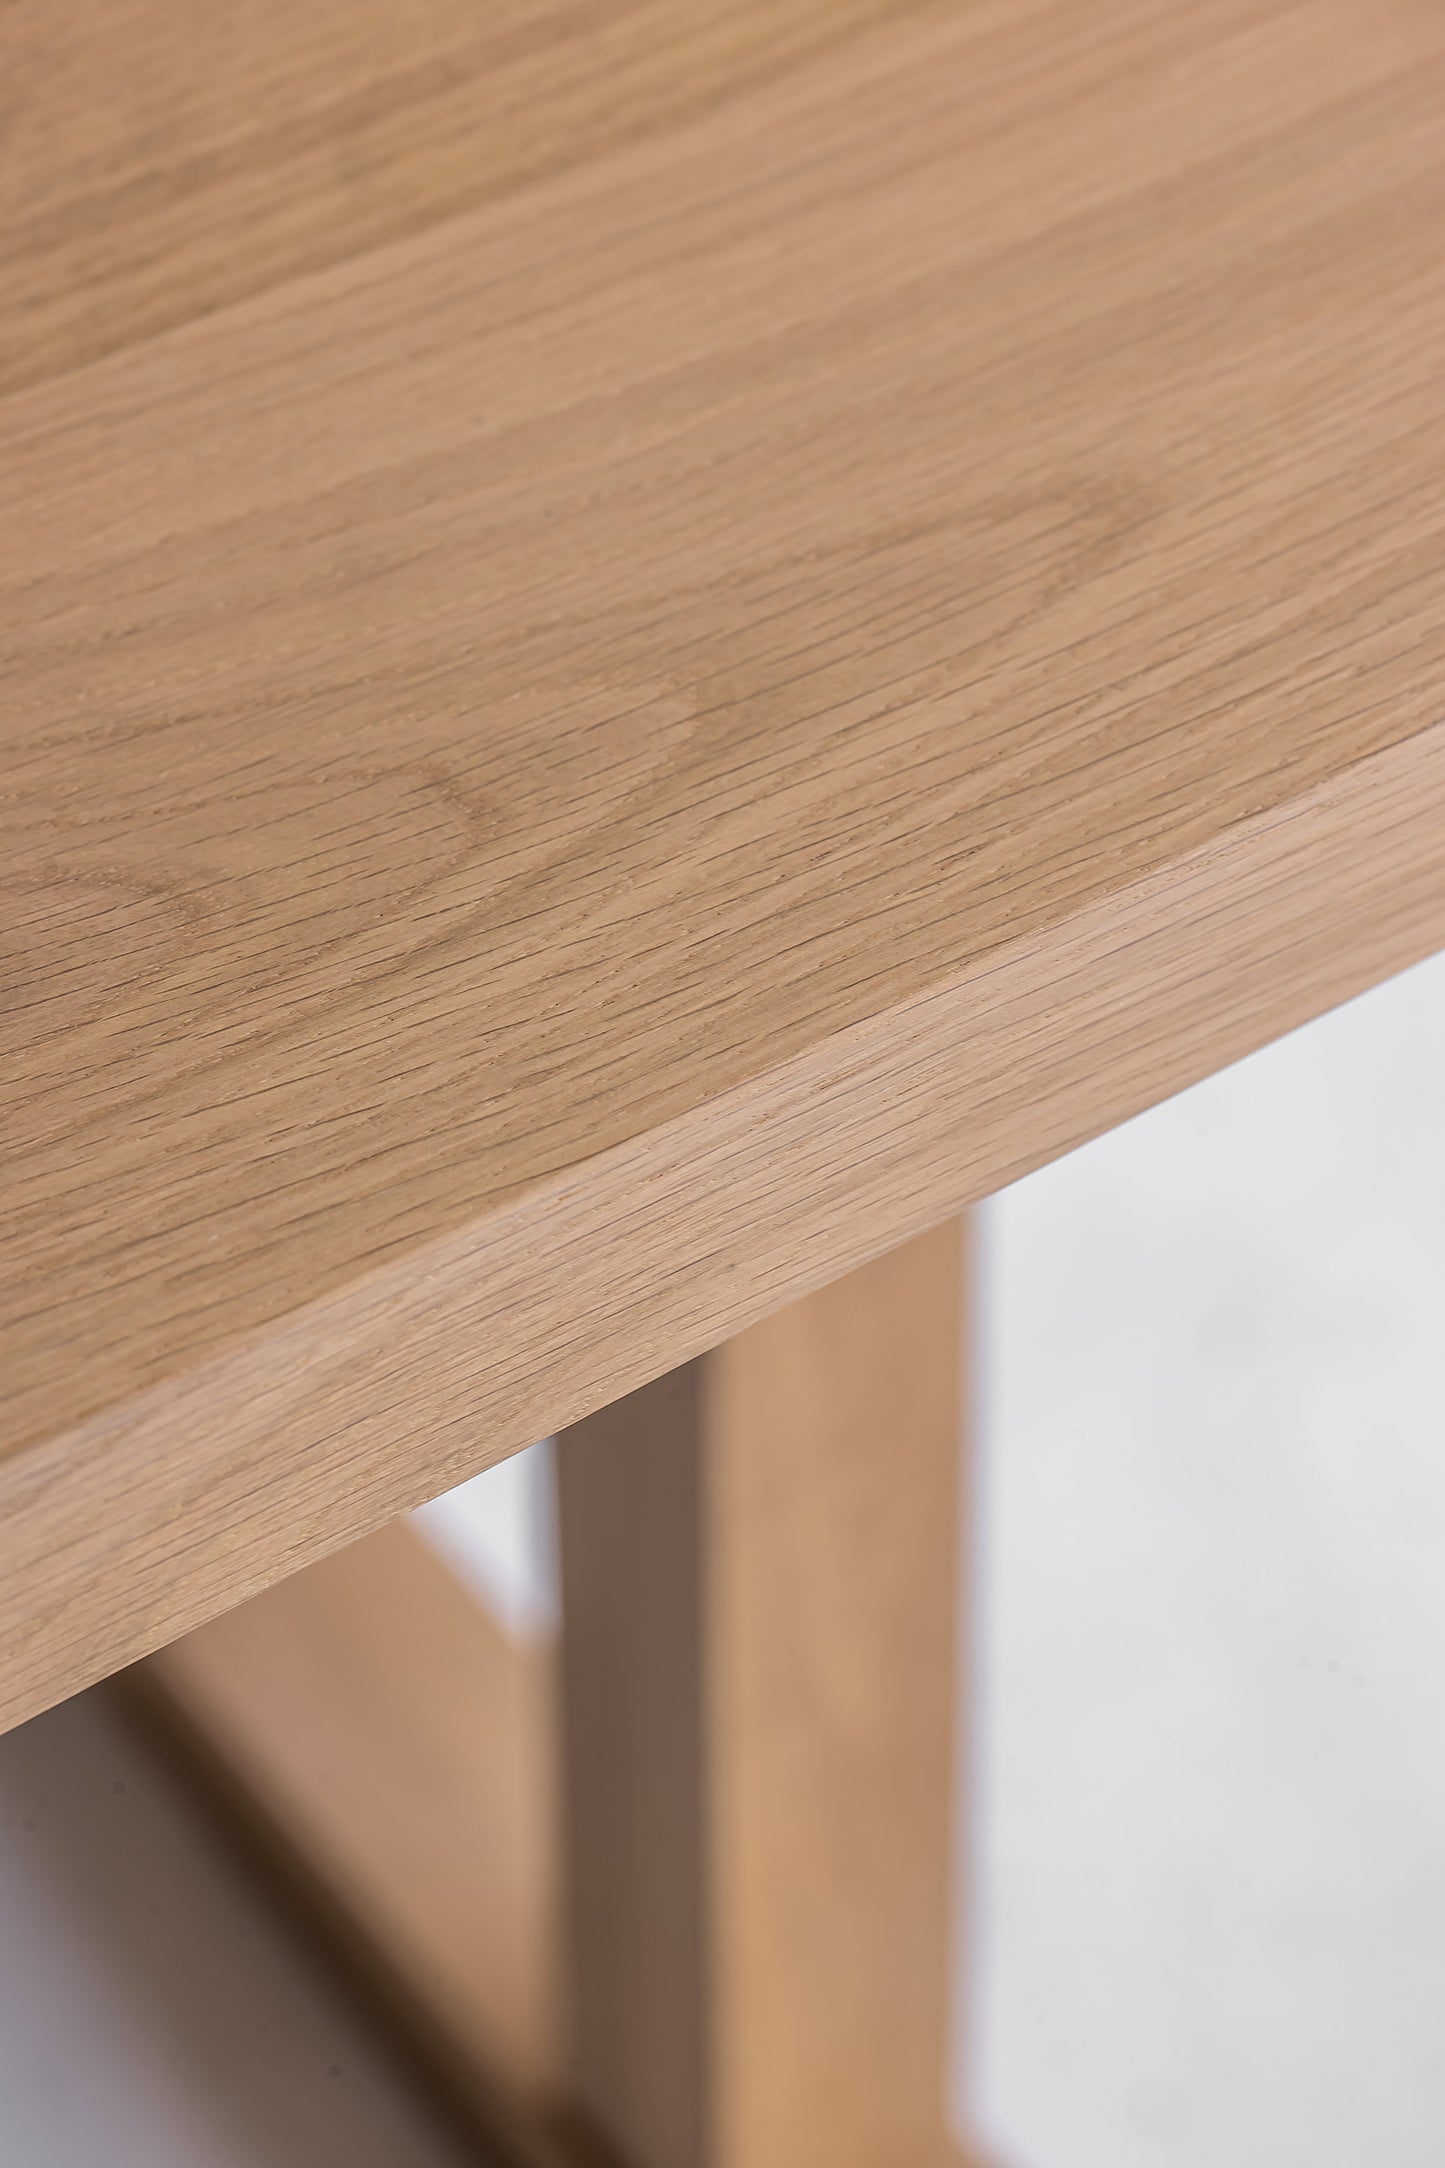 Detail shot of the thick solid oak tabletop.